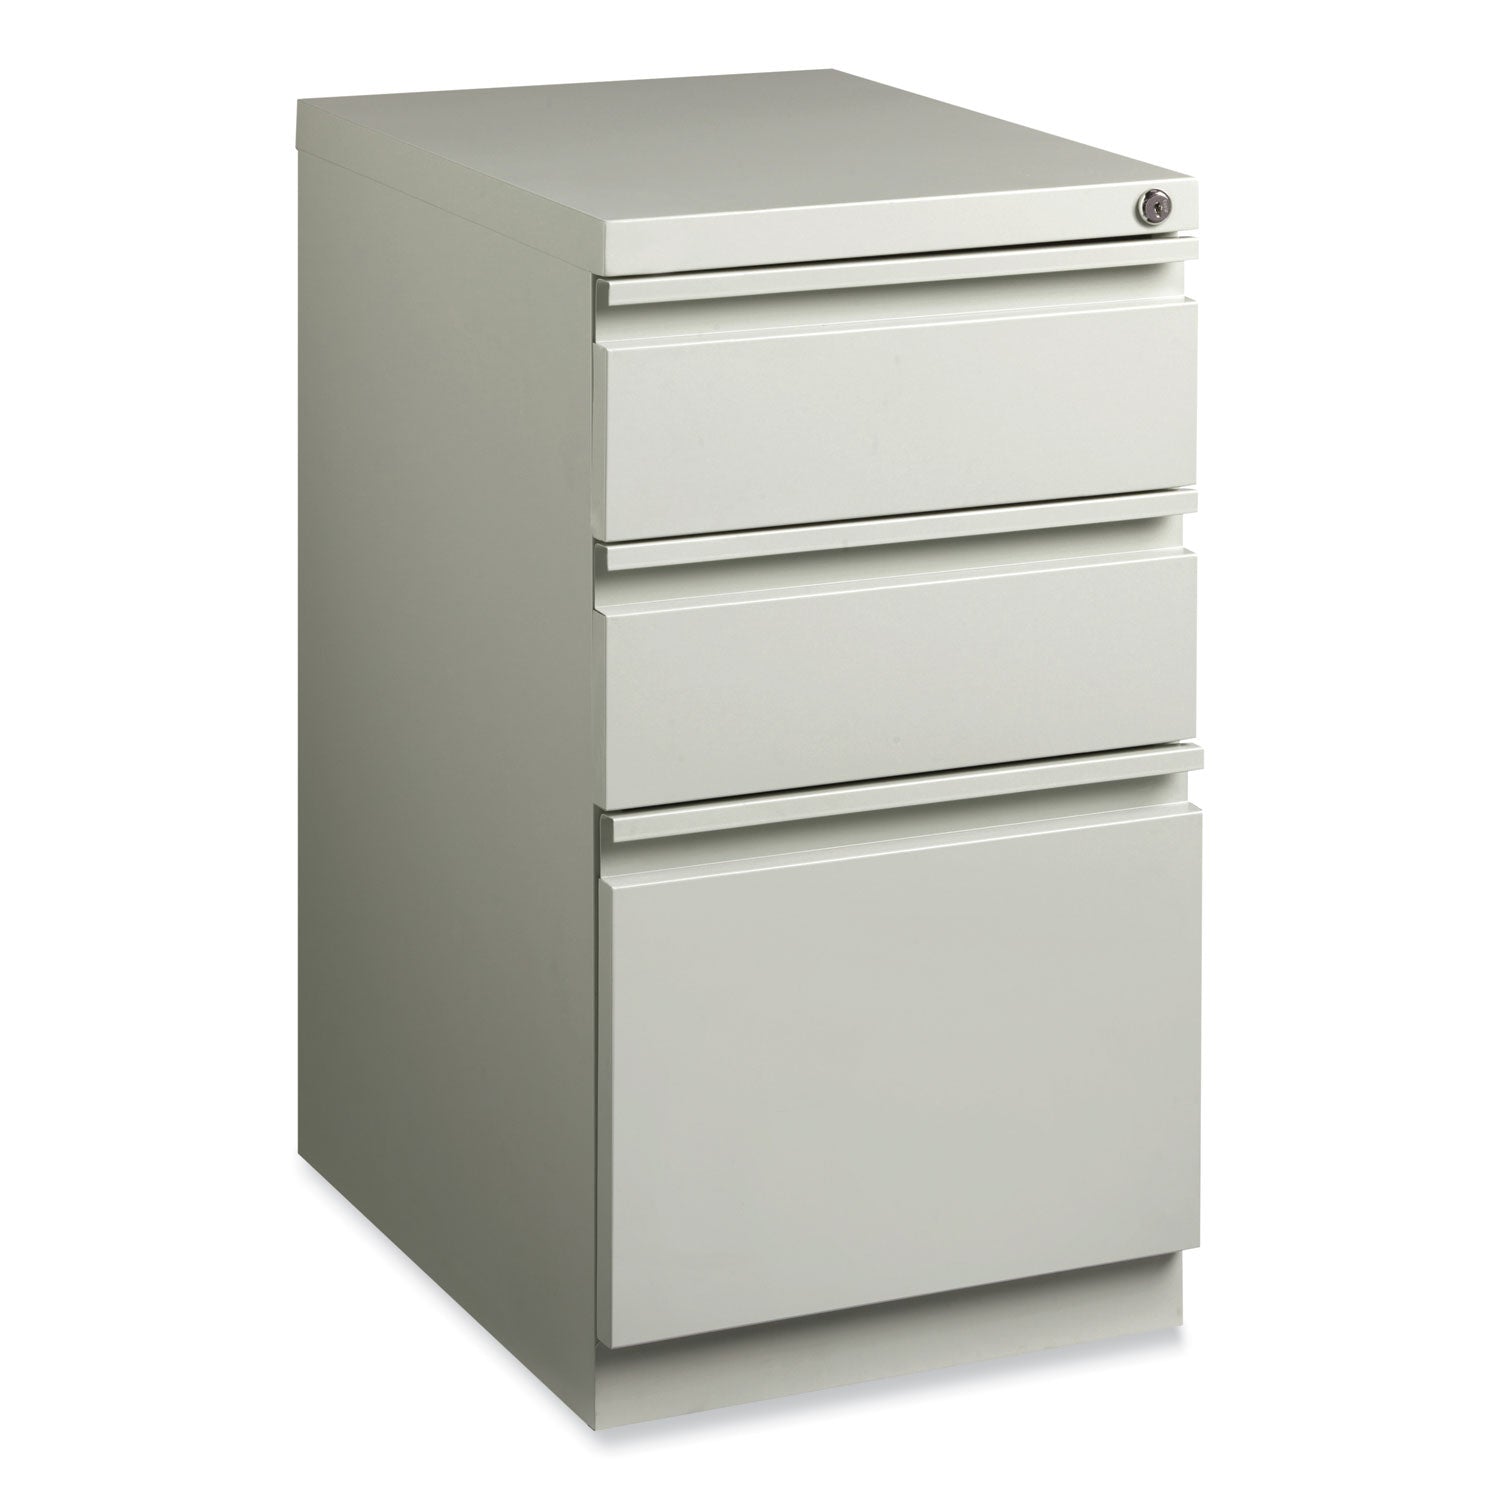 full-width-pull-20-deep-mobile-pedestal-file-box-box-file-letter-lt-gray-15-x-1988-x-2775-ships-in-4-6-business-days_hid18576 - 2